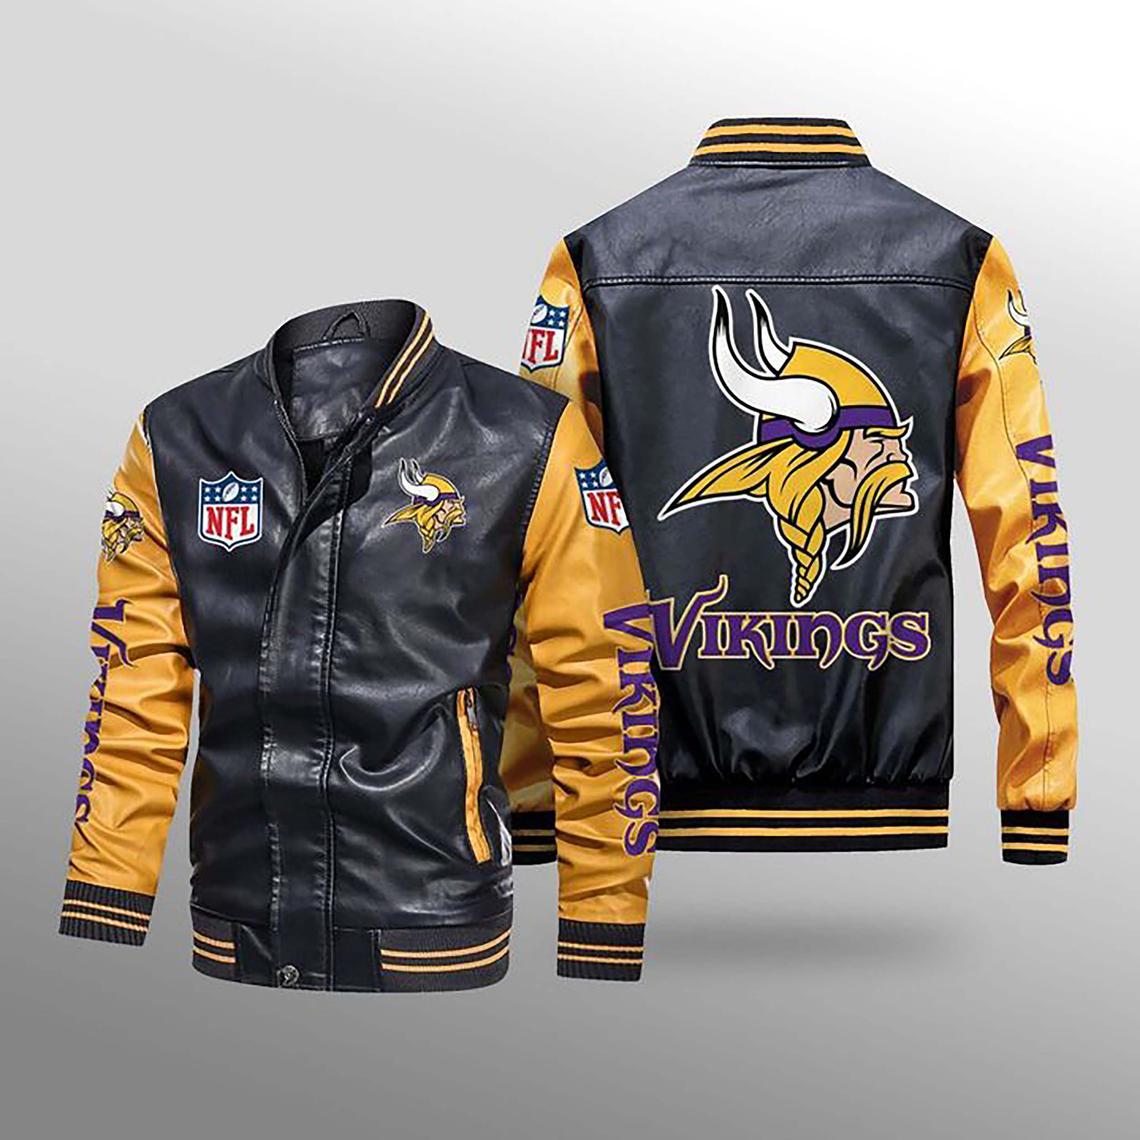 30% OFF The Best Men's Minnesota Vikings Leather Jacket For Sale